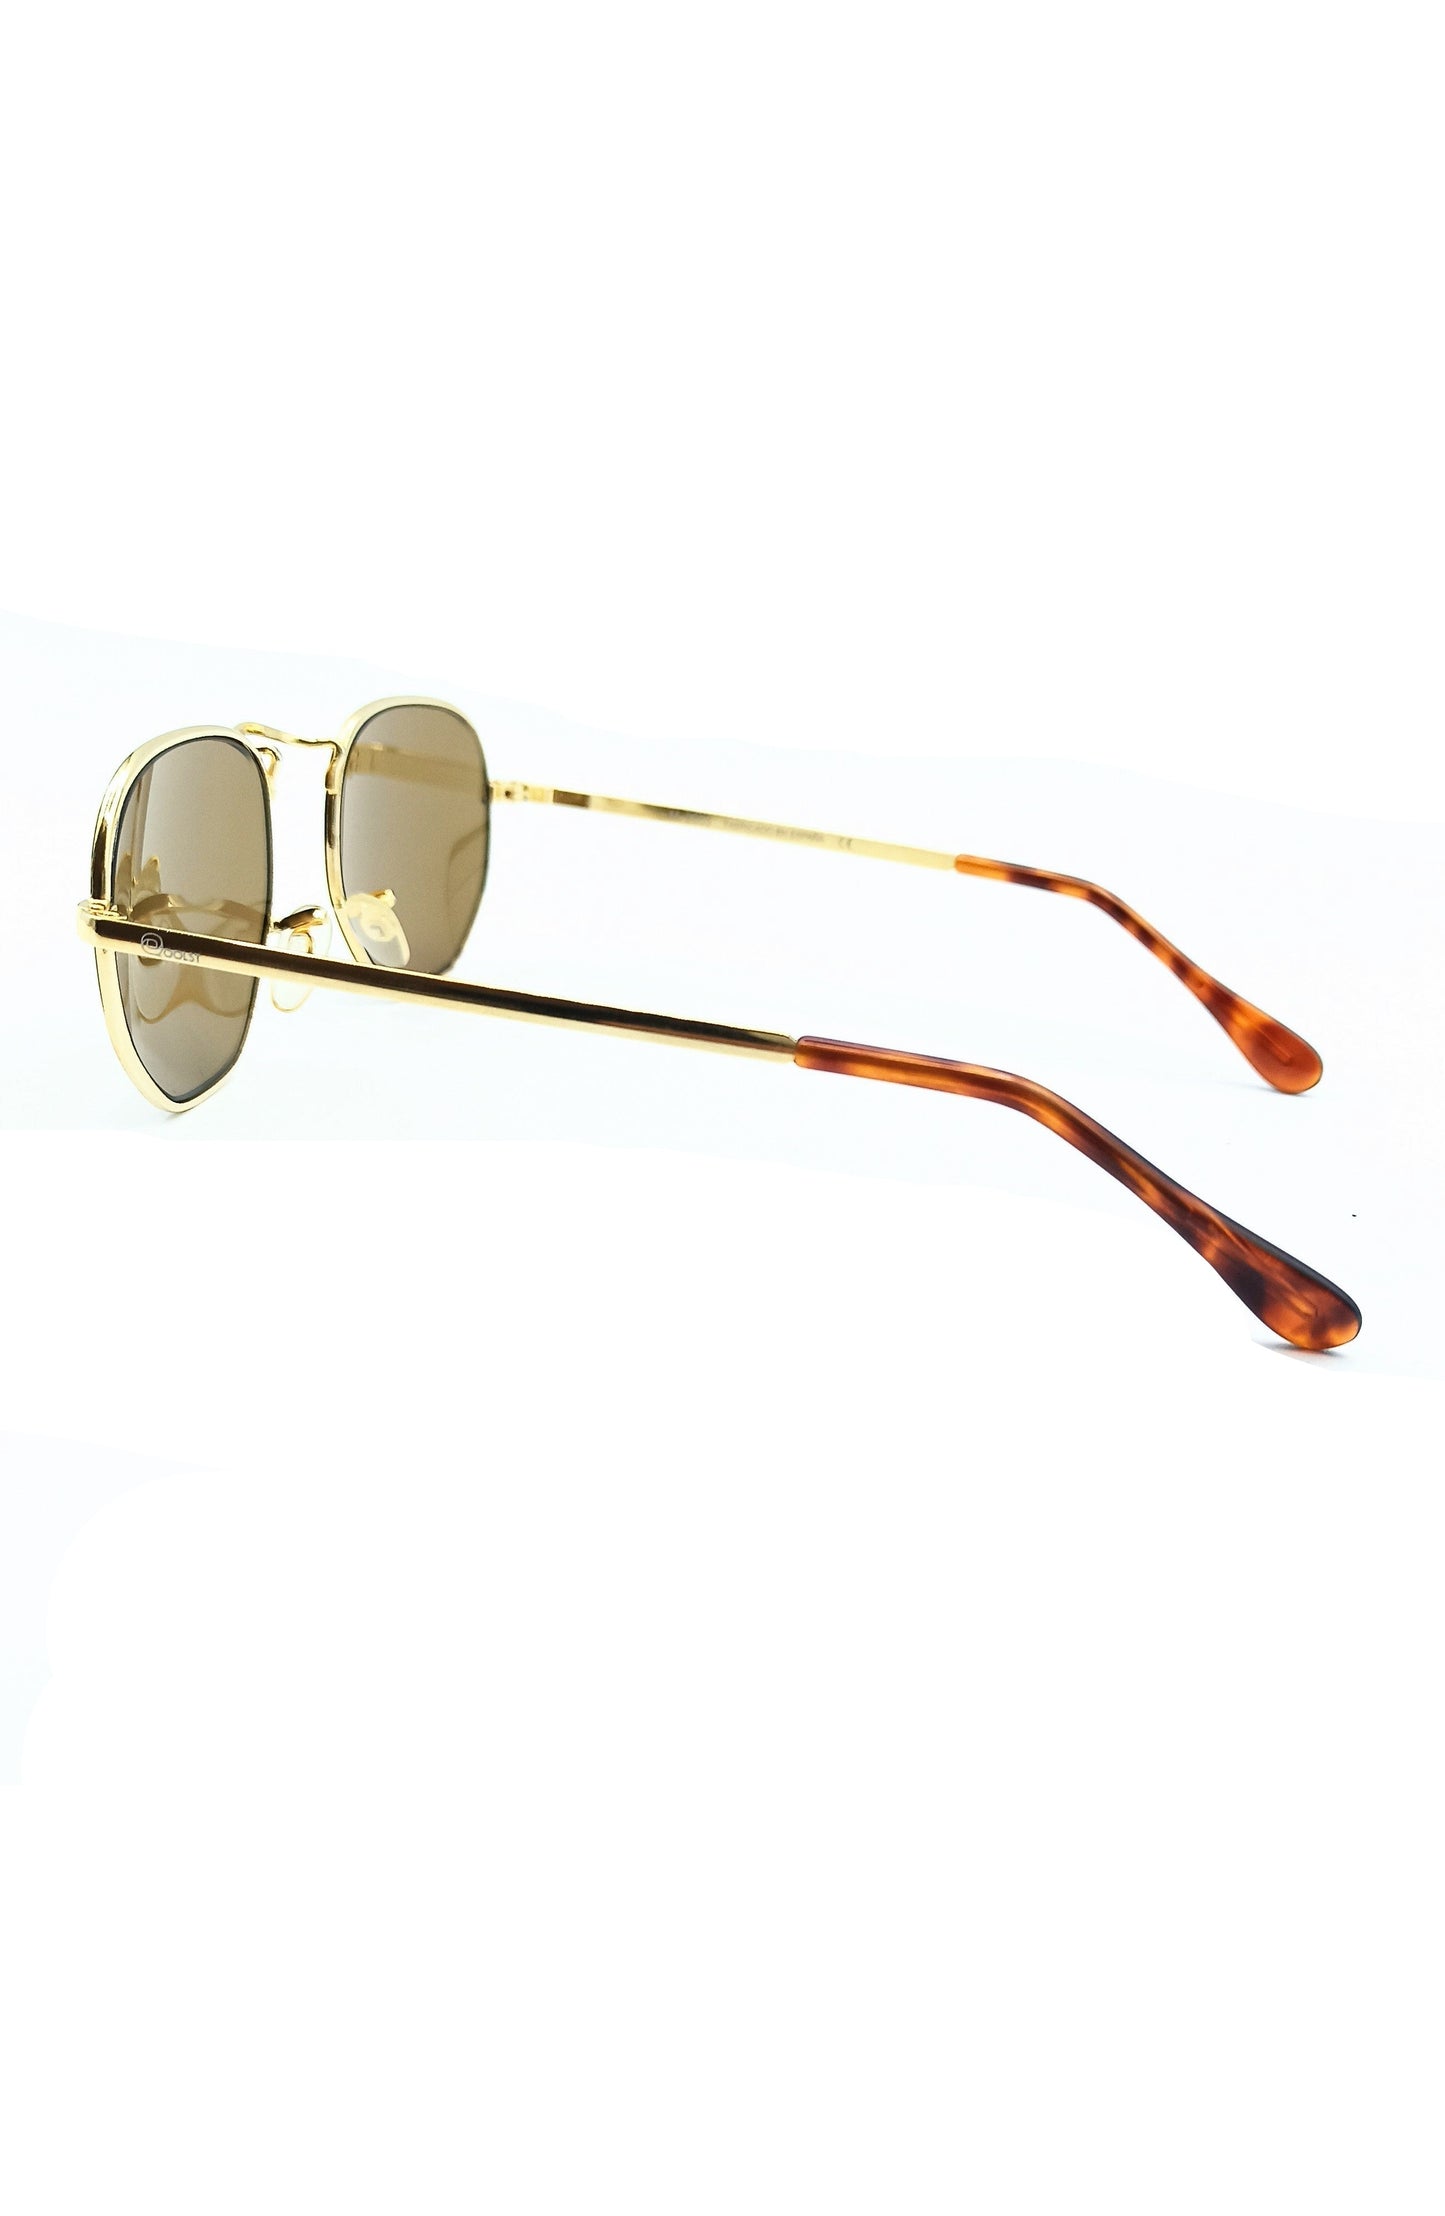 Vintage sunglasses for men and women Qoolst Guilty made in Spain